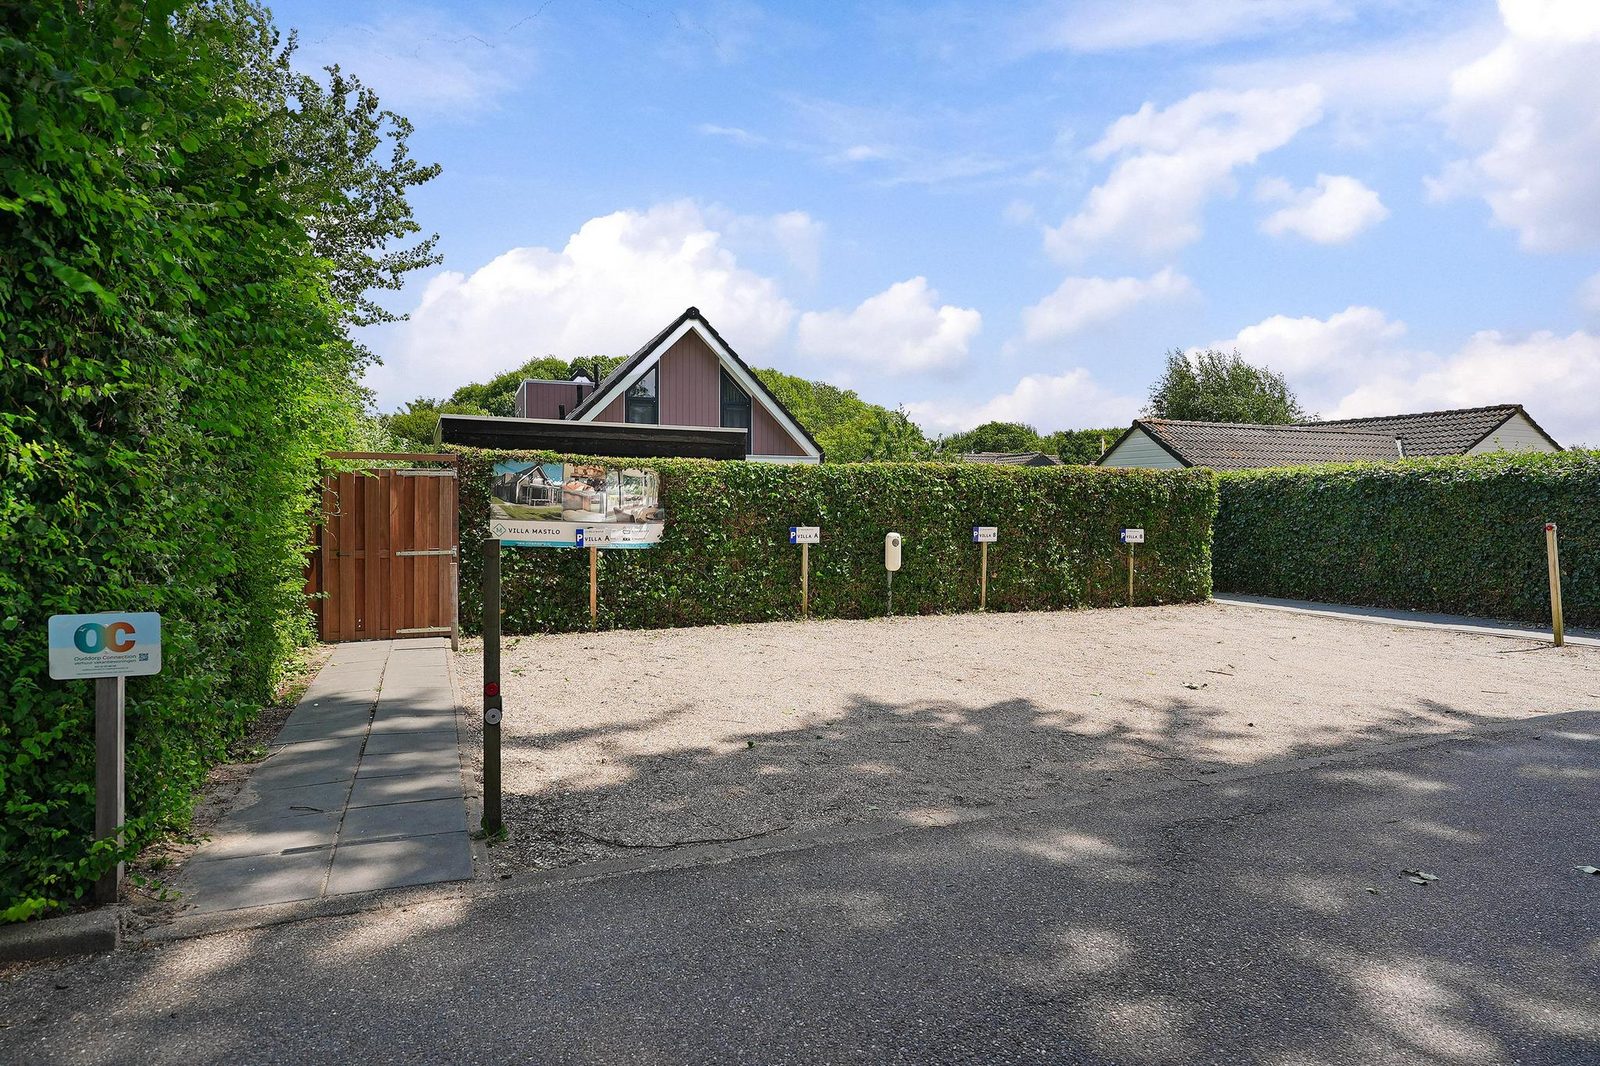 Oude Nieuwelandseweg 33A - Ouddorp - Villa IJsvogel  (with jacuzzi, extra costs for use)